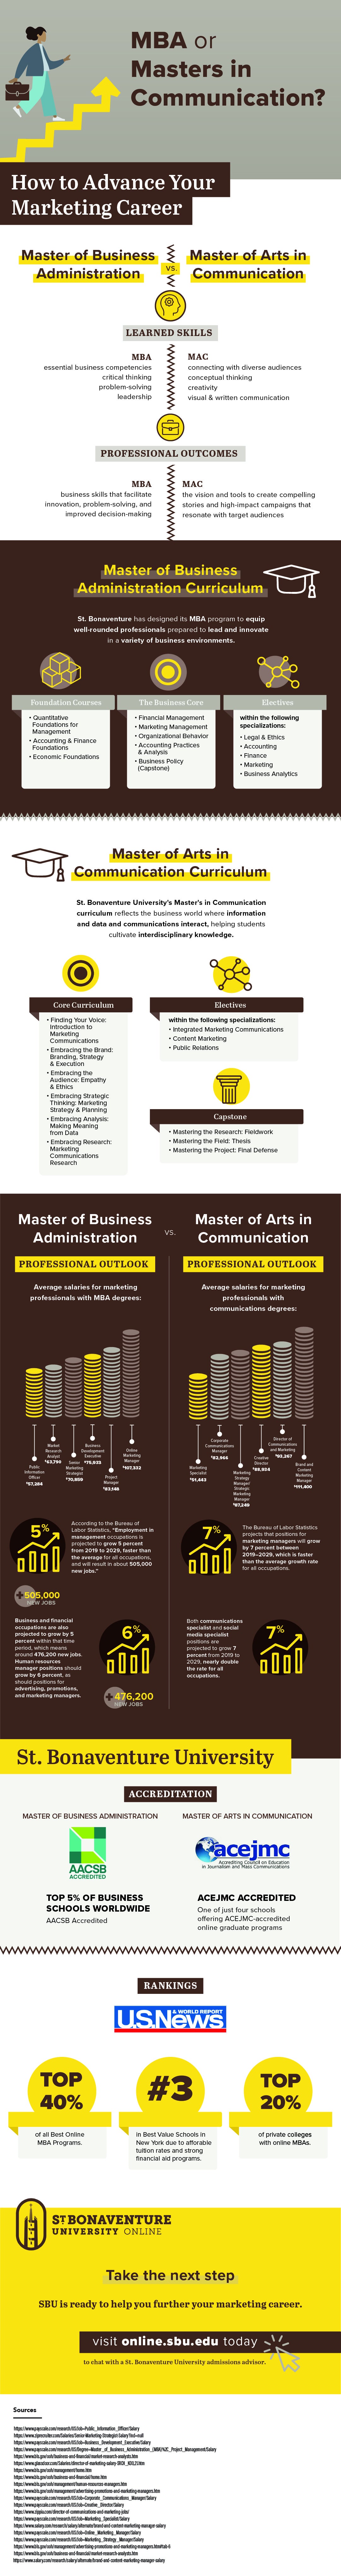 MBA vs. MA in Communication Infographic